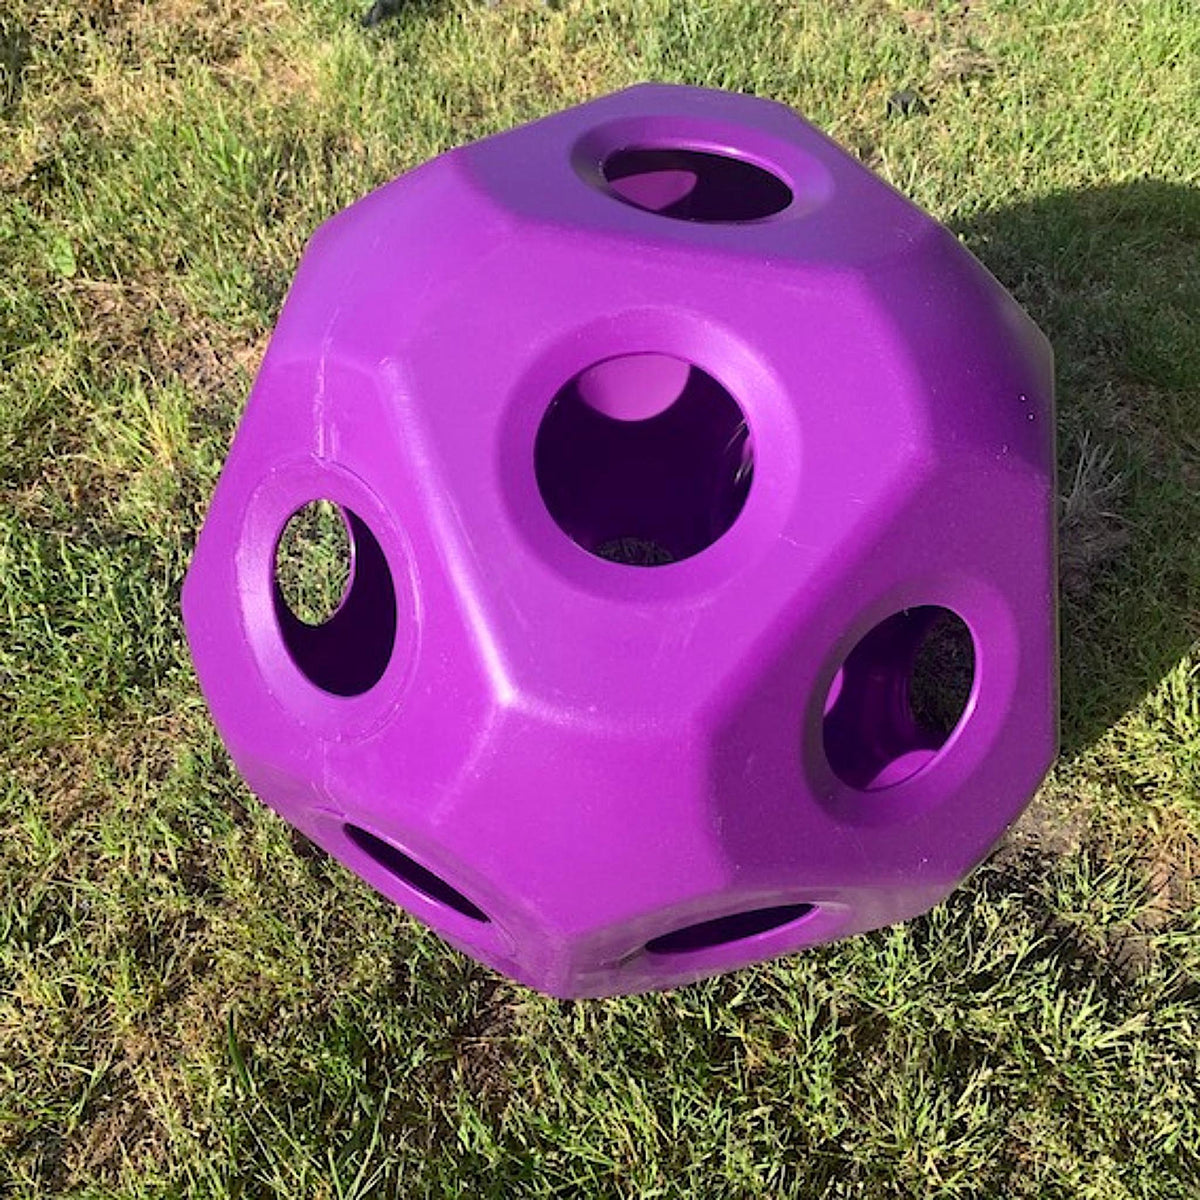 Purple plastic hay ball with flat sides and moderately sized holes throughout.